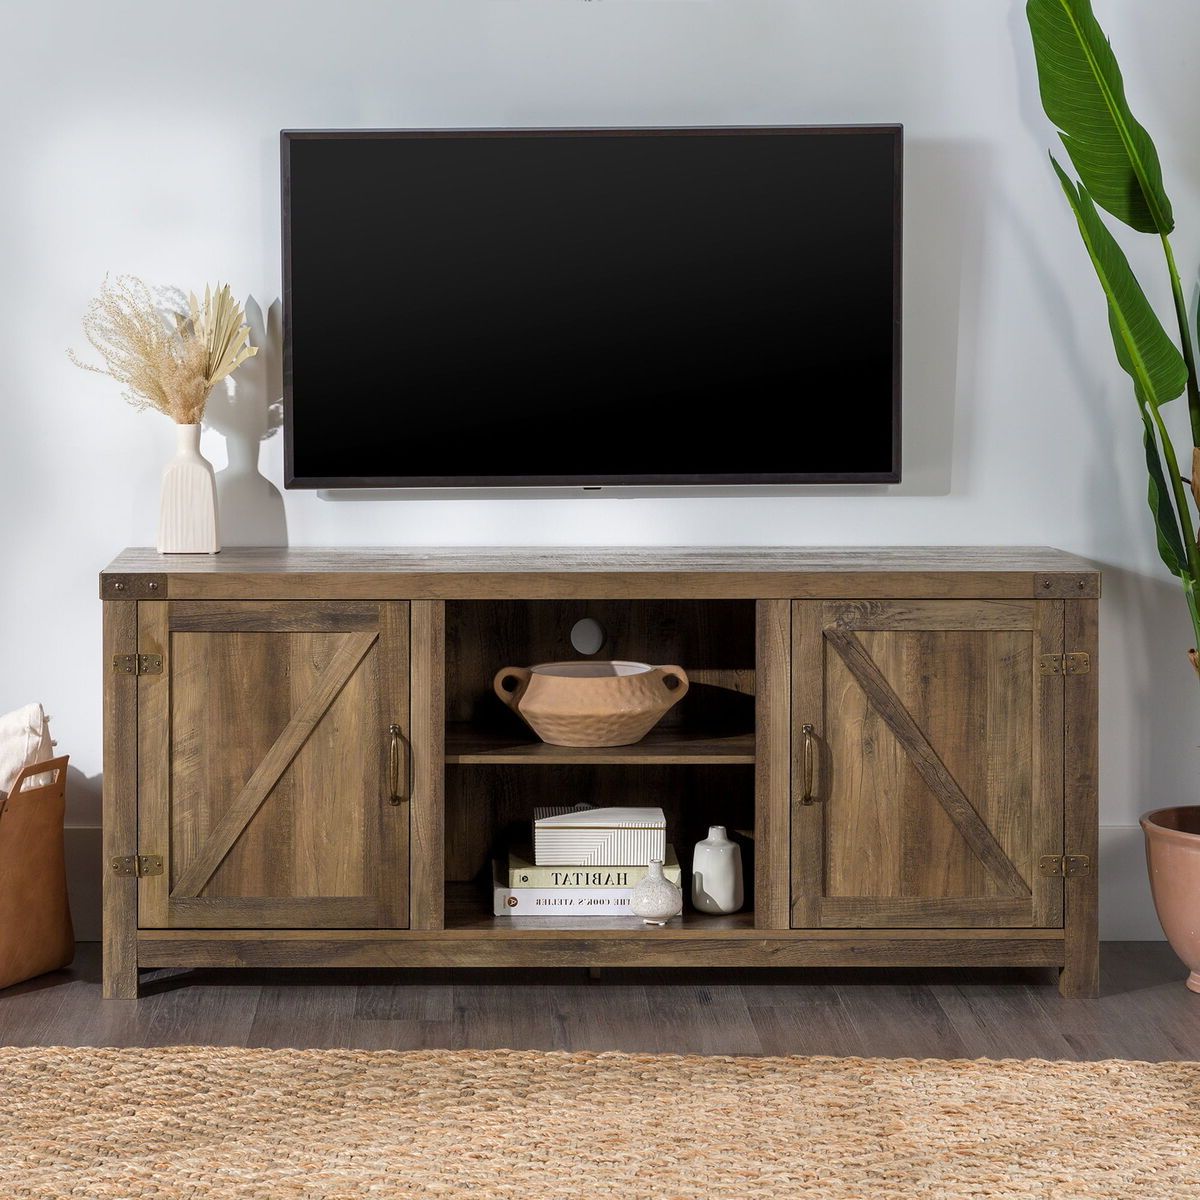 Woven Paths Modern Farmhouse Barn Door Tv Stand For Tvs Up To 65",  Reclaimed | Ebay With Regard To Modern Farmhouse Barn Tv Stands (View 6 of 20)